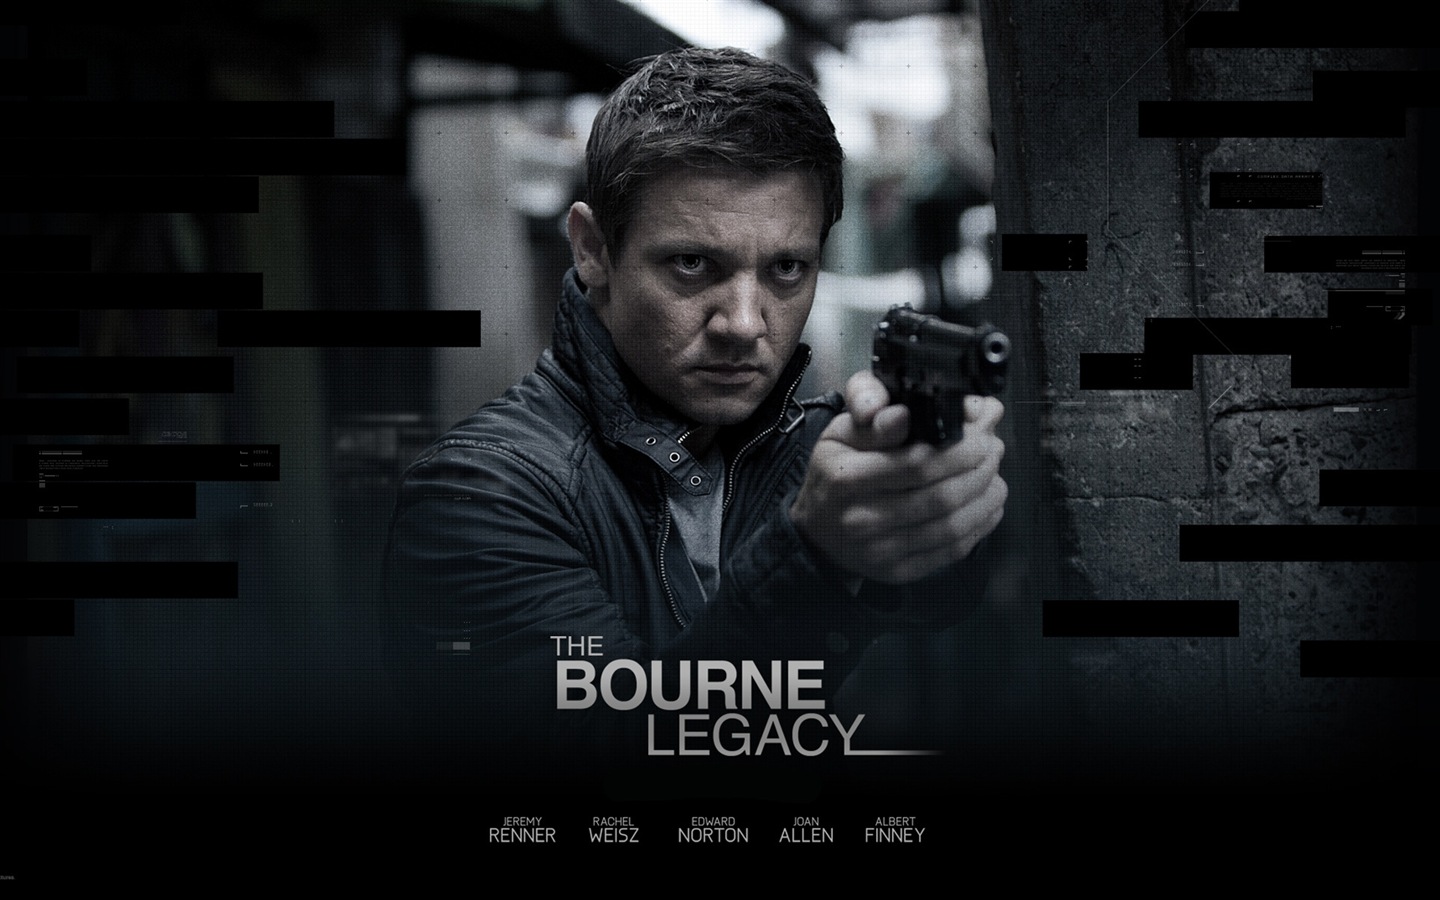 The Bourne Legacy HD wallpapers #2 - 1440x900